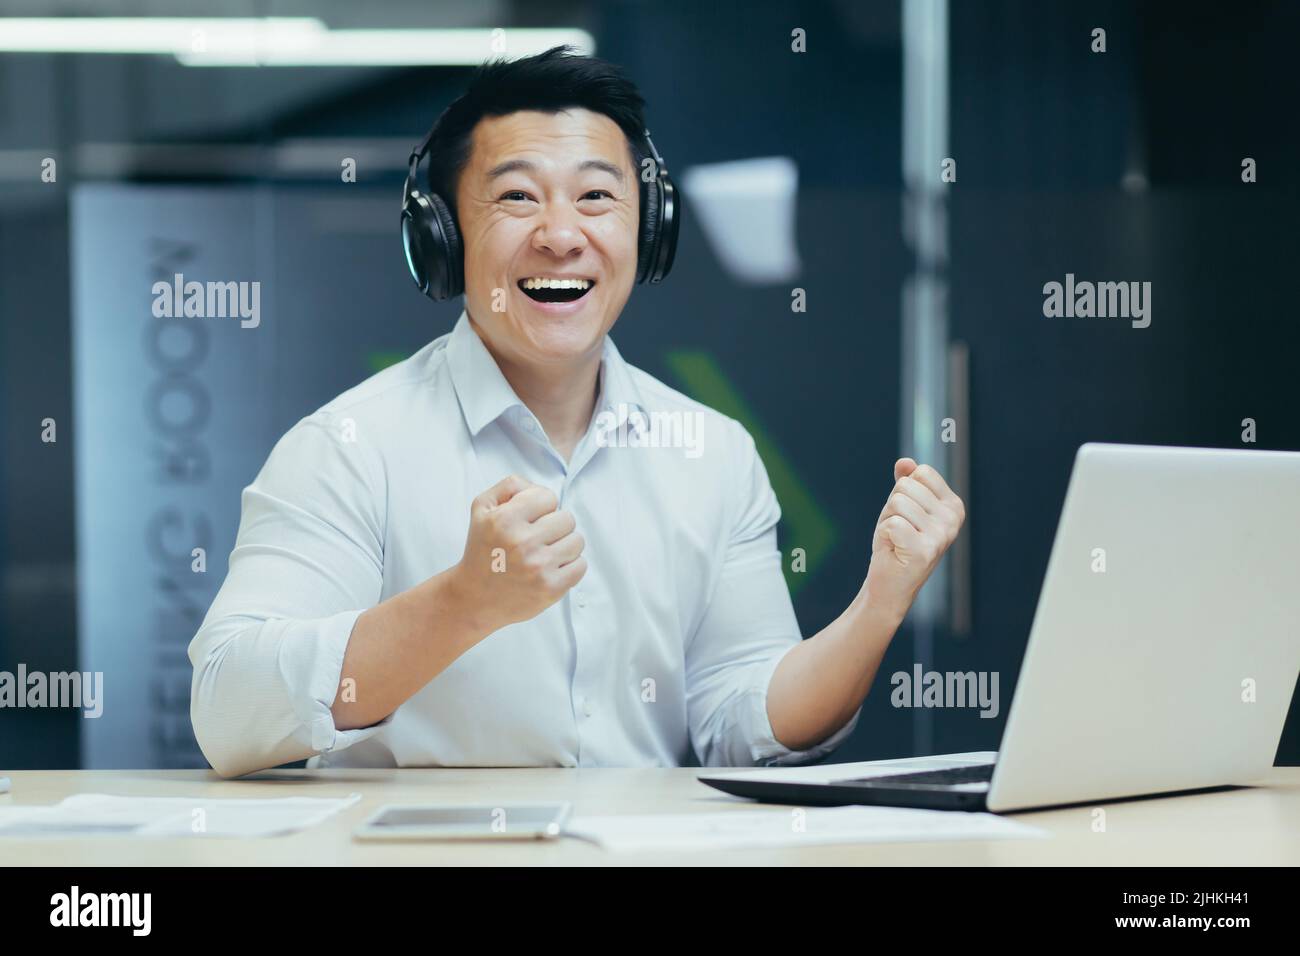 portrait of businessman with headphones, asian man smiling and looking at camera, boss watching sports match at workplace Stock Photo